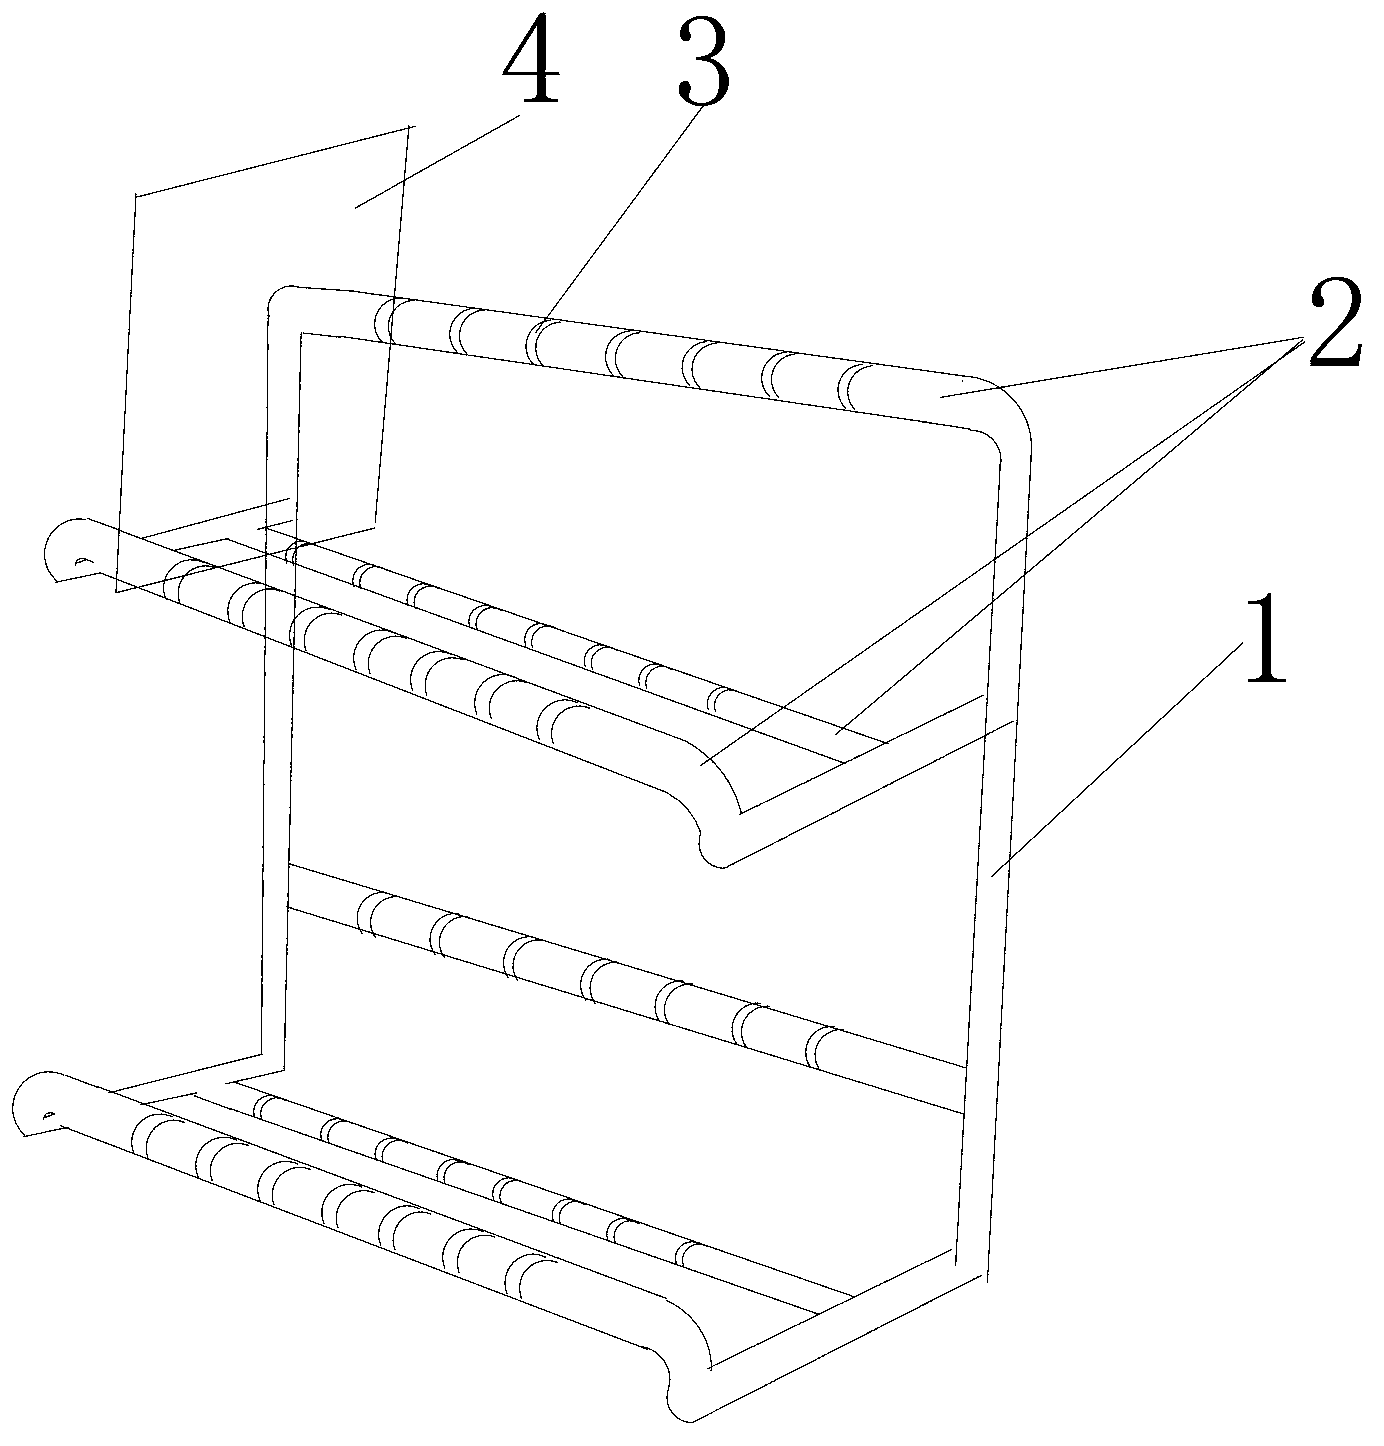 Glass transporting frame used for solar cell preparation